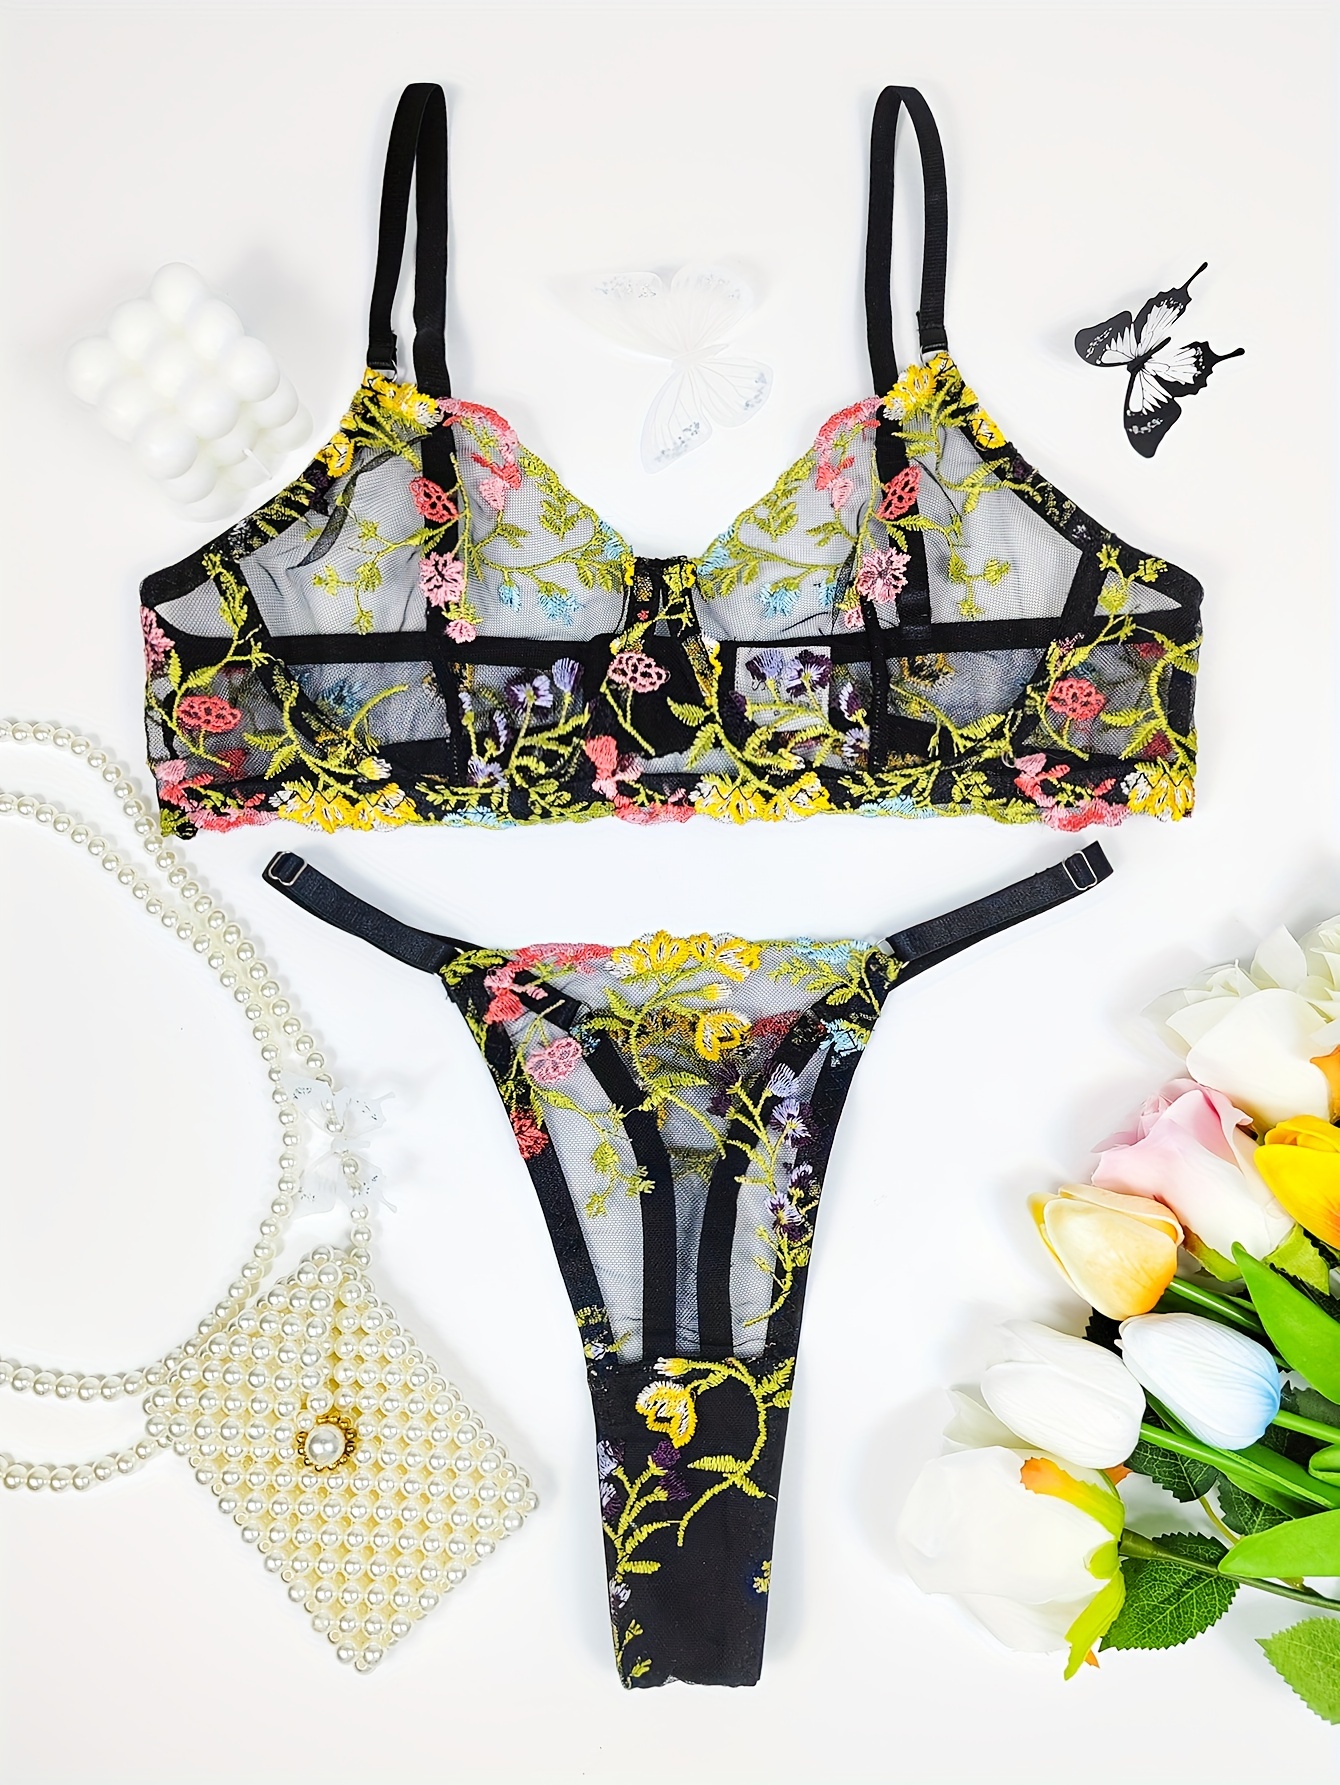 Womens Sexy Lace Lingerie Set, See Through Bra And Panty Set, Floral  Embroidery Underwear Set From Mengqiqi05, $13.58